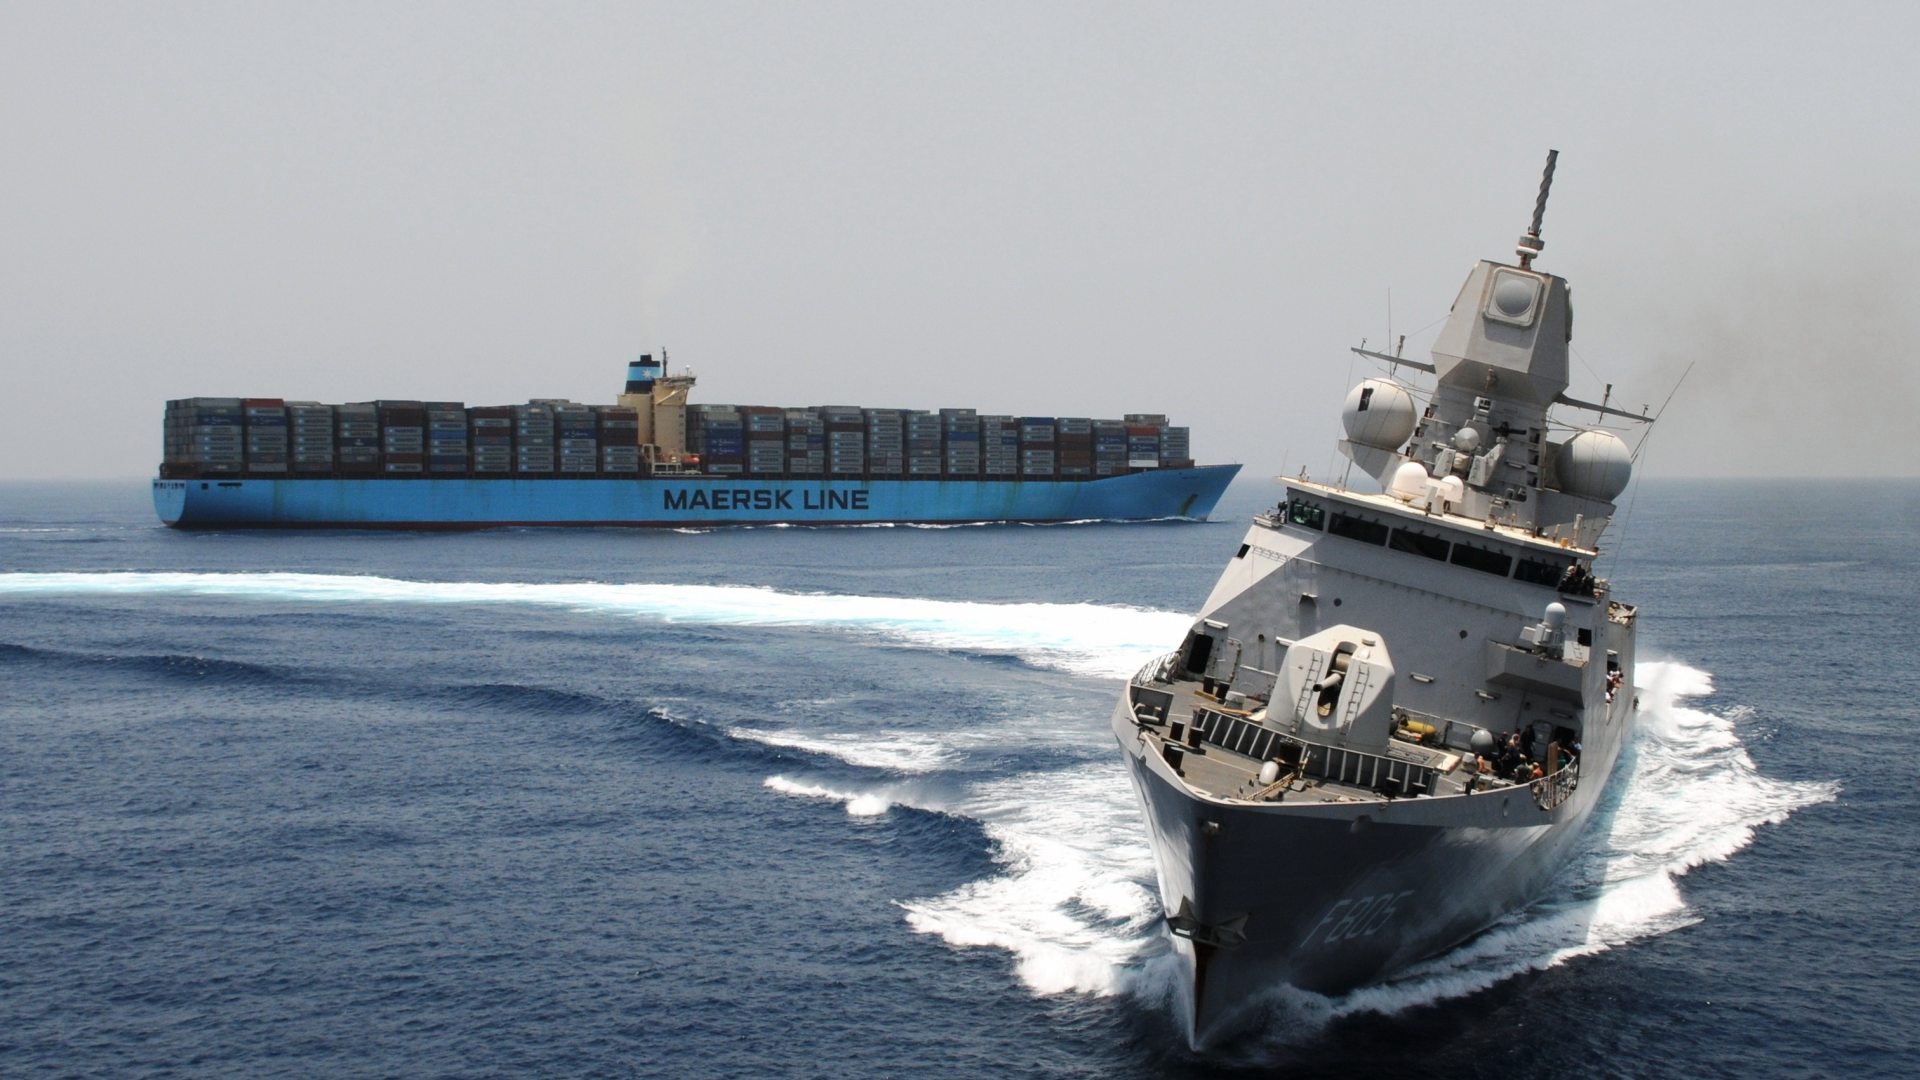 weapon, sea, ships, circulation, maersk, bow, conteinership, list, fregat, military, f805